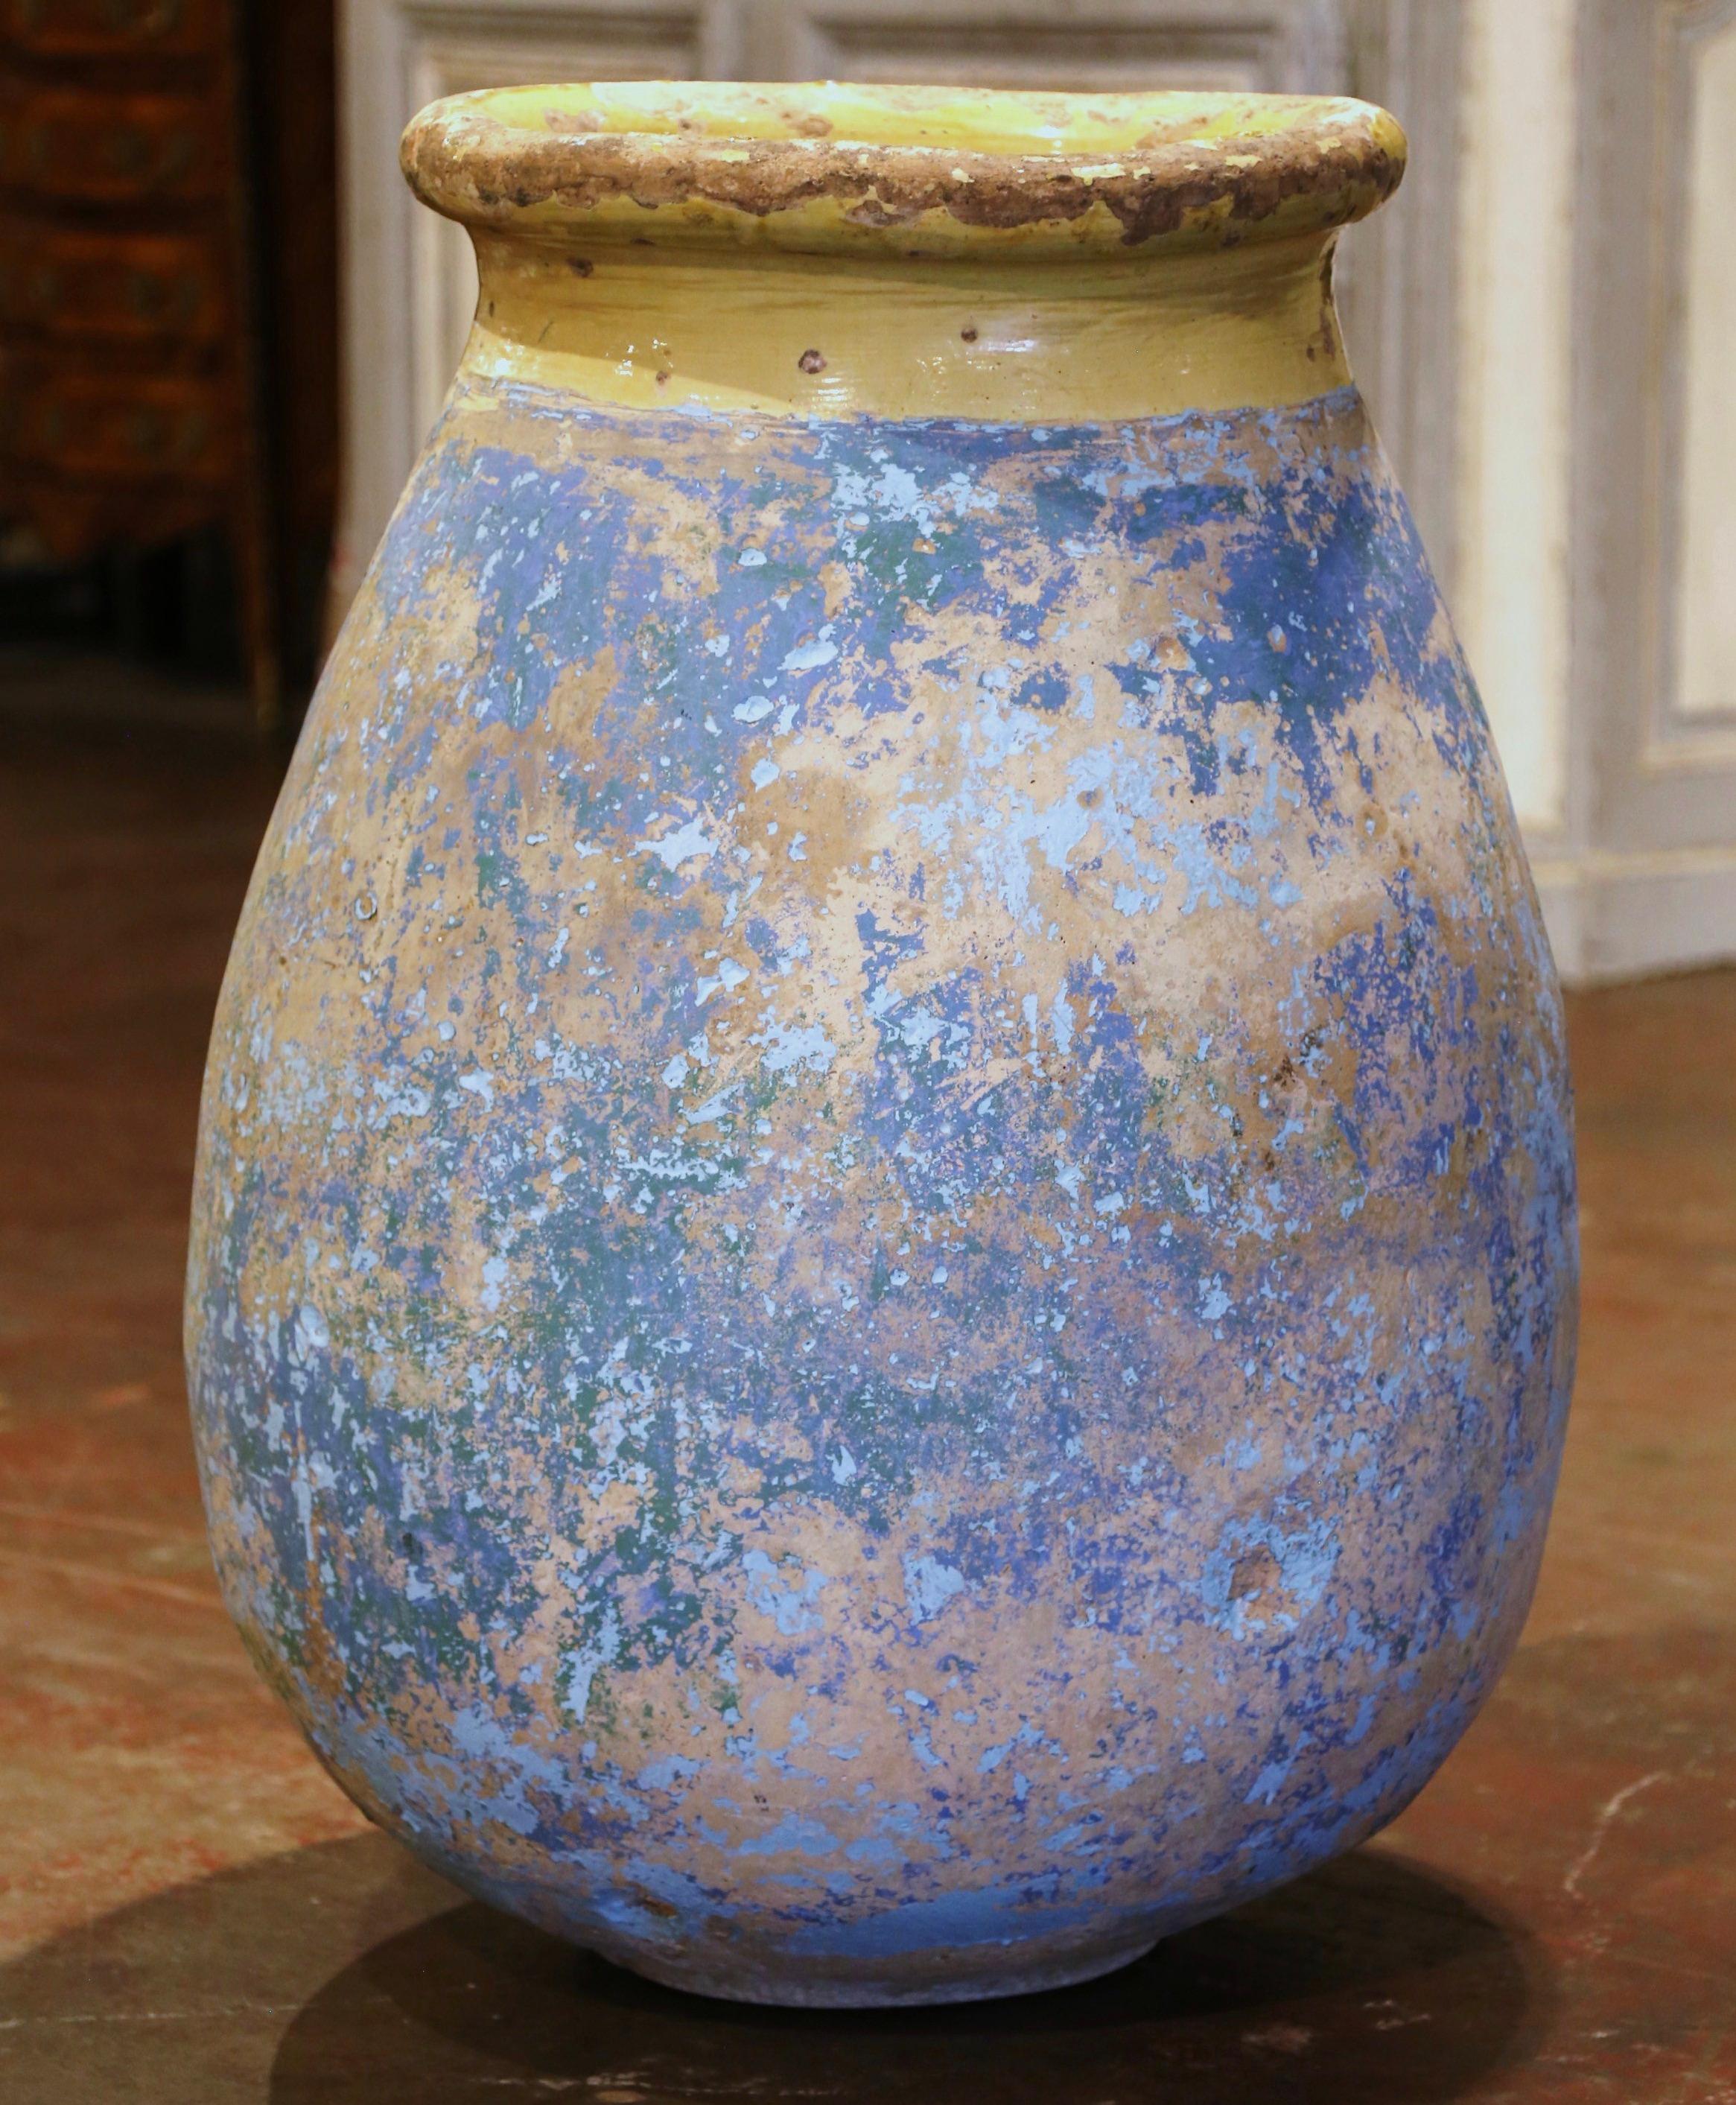 This large, antique earthenware olive jar was created in Biot, Provence, Southern France, circa 1760. Made of blond clay and neutral in color, the terracotta vase has a traditional round bulbous shape. The rustic, time-worn pot features a pale